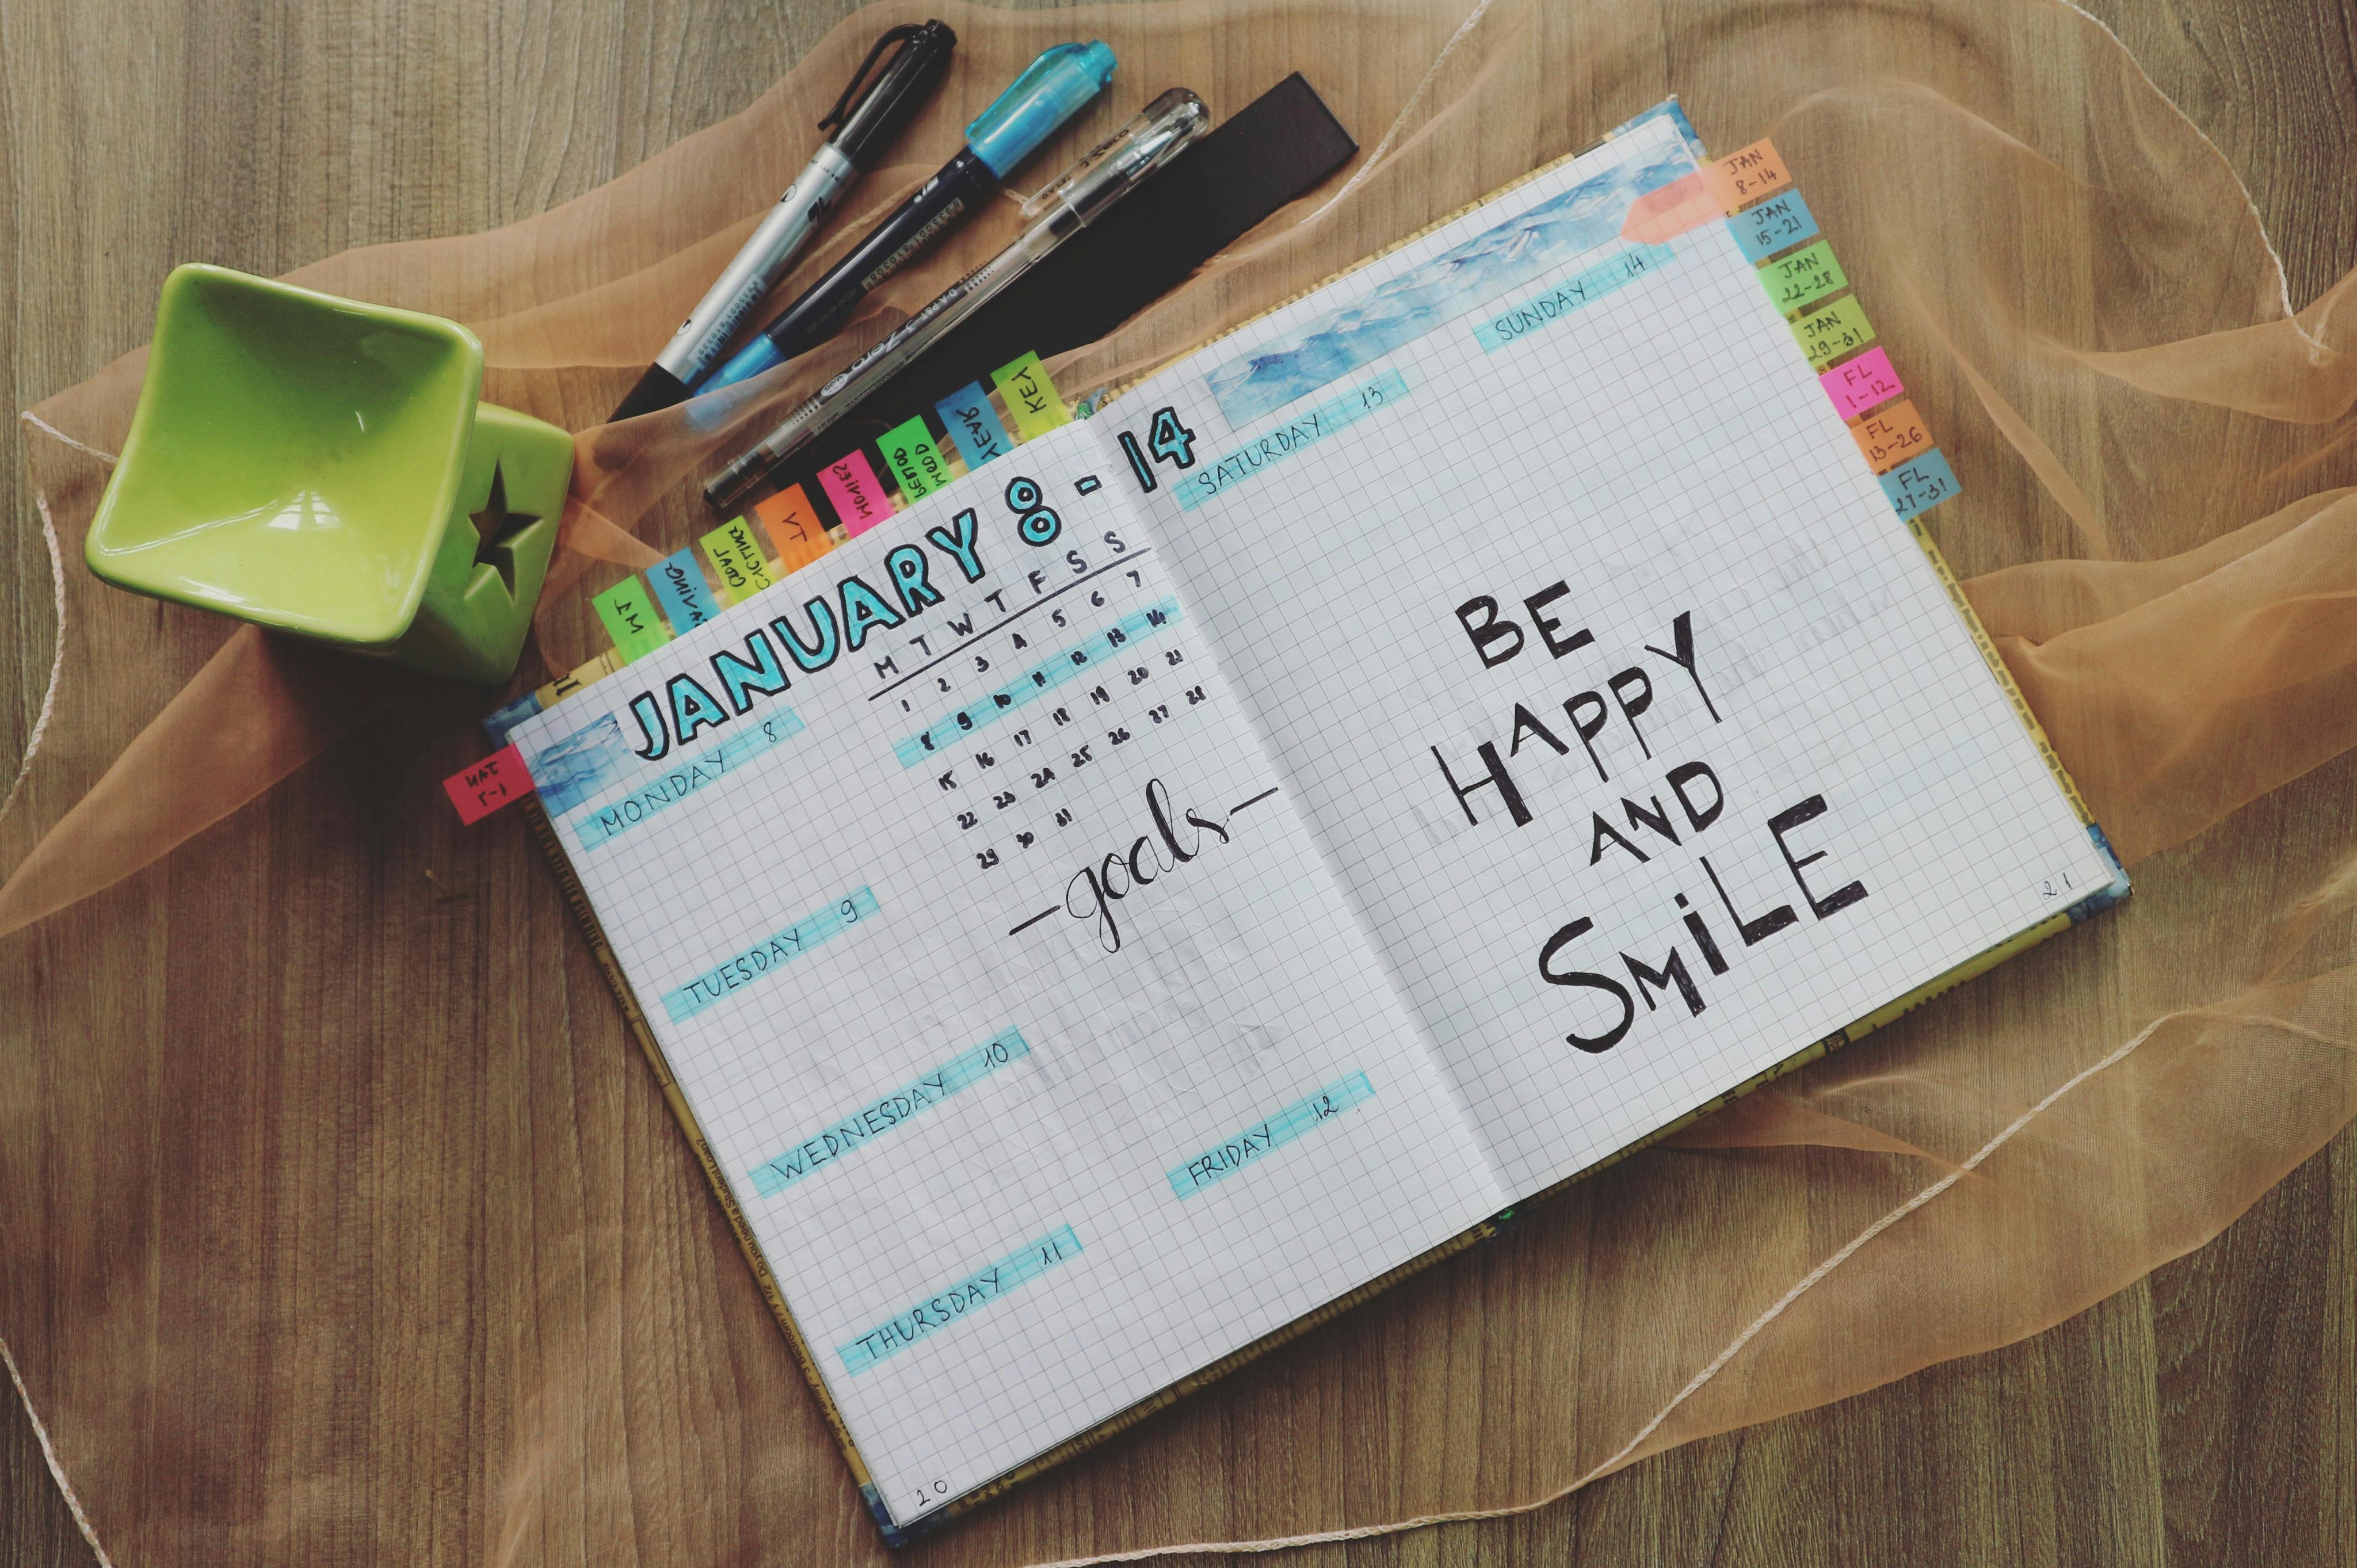 Inspirational Quotes Written On A Planner · Free Stock Photo